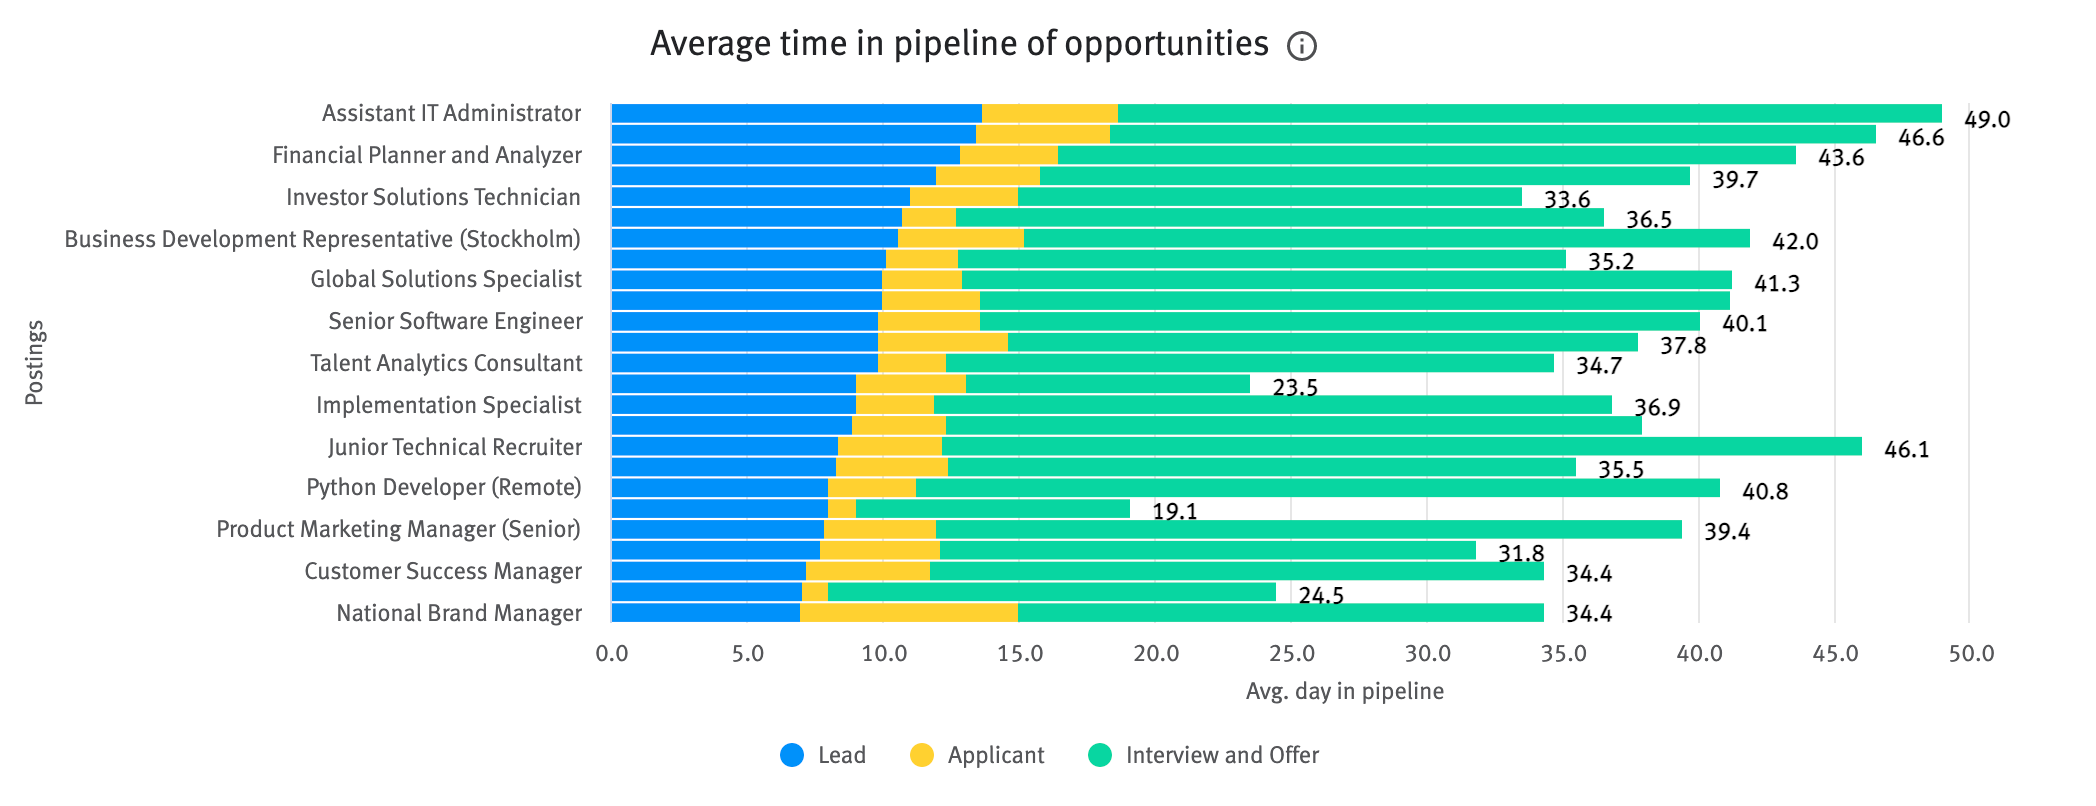 Average time in pipeline of opportunities chart